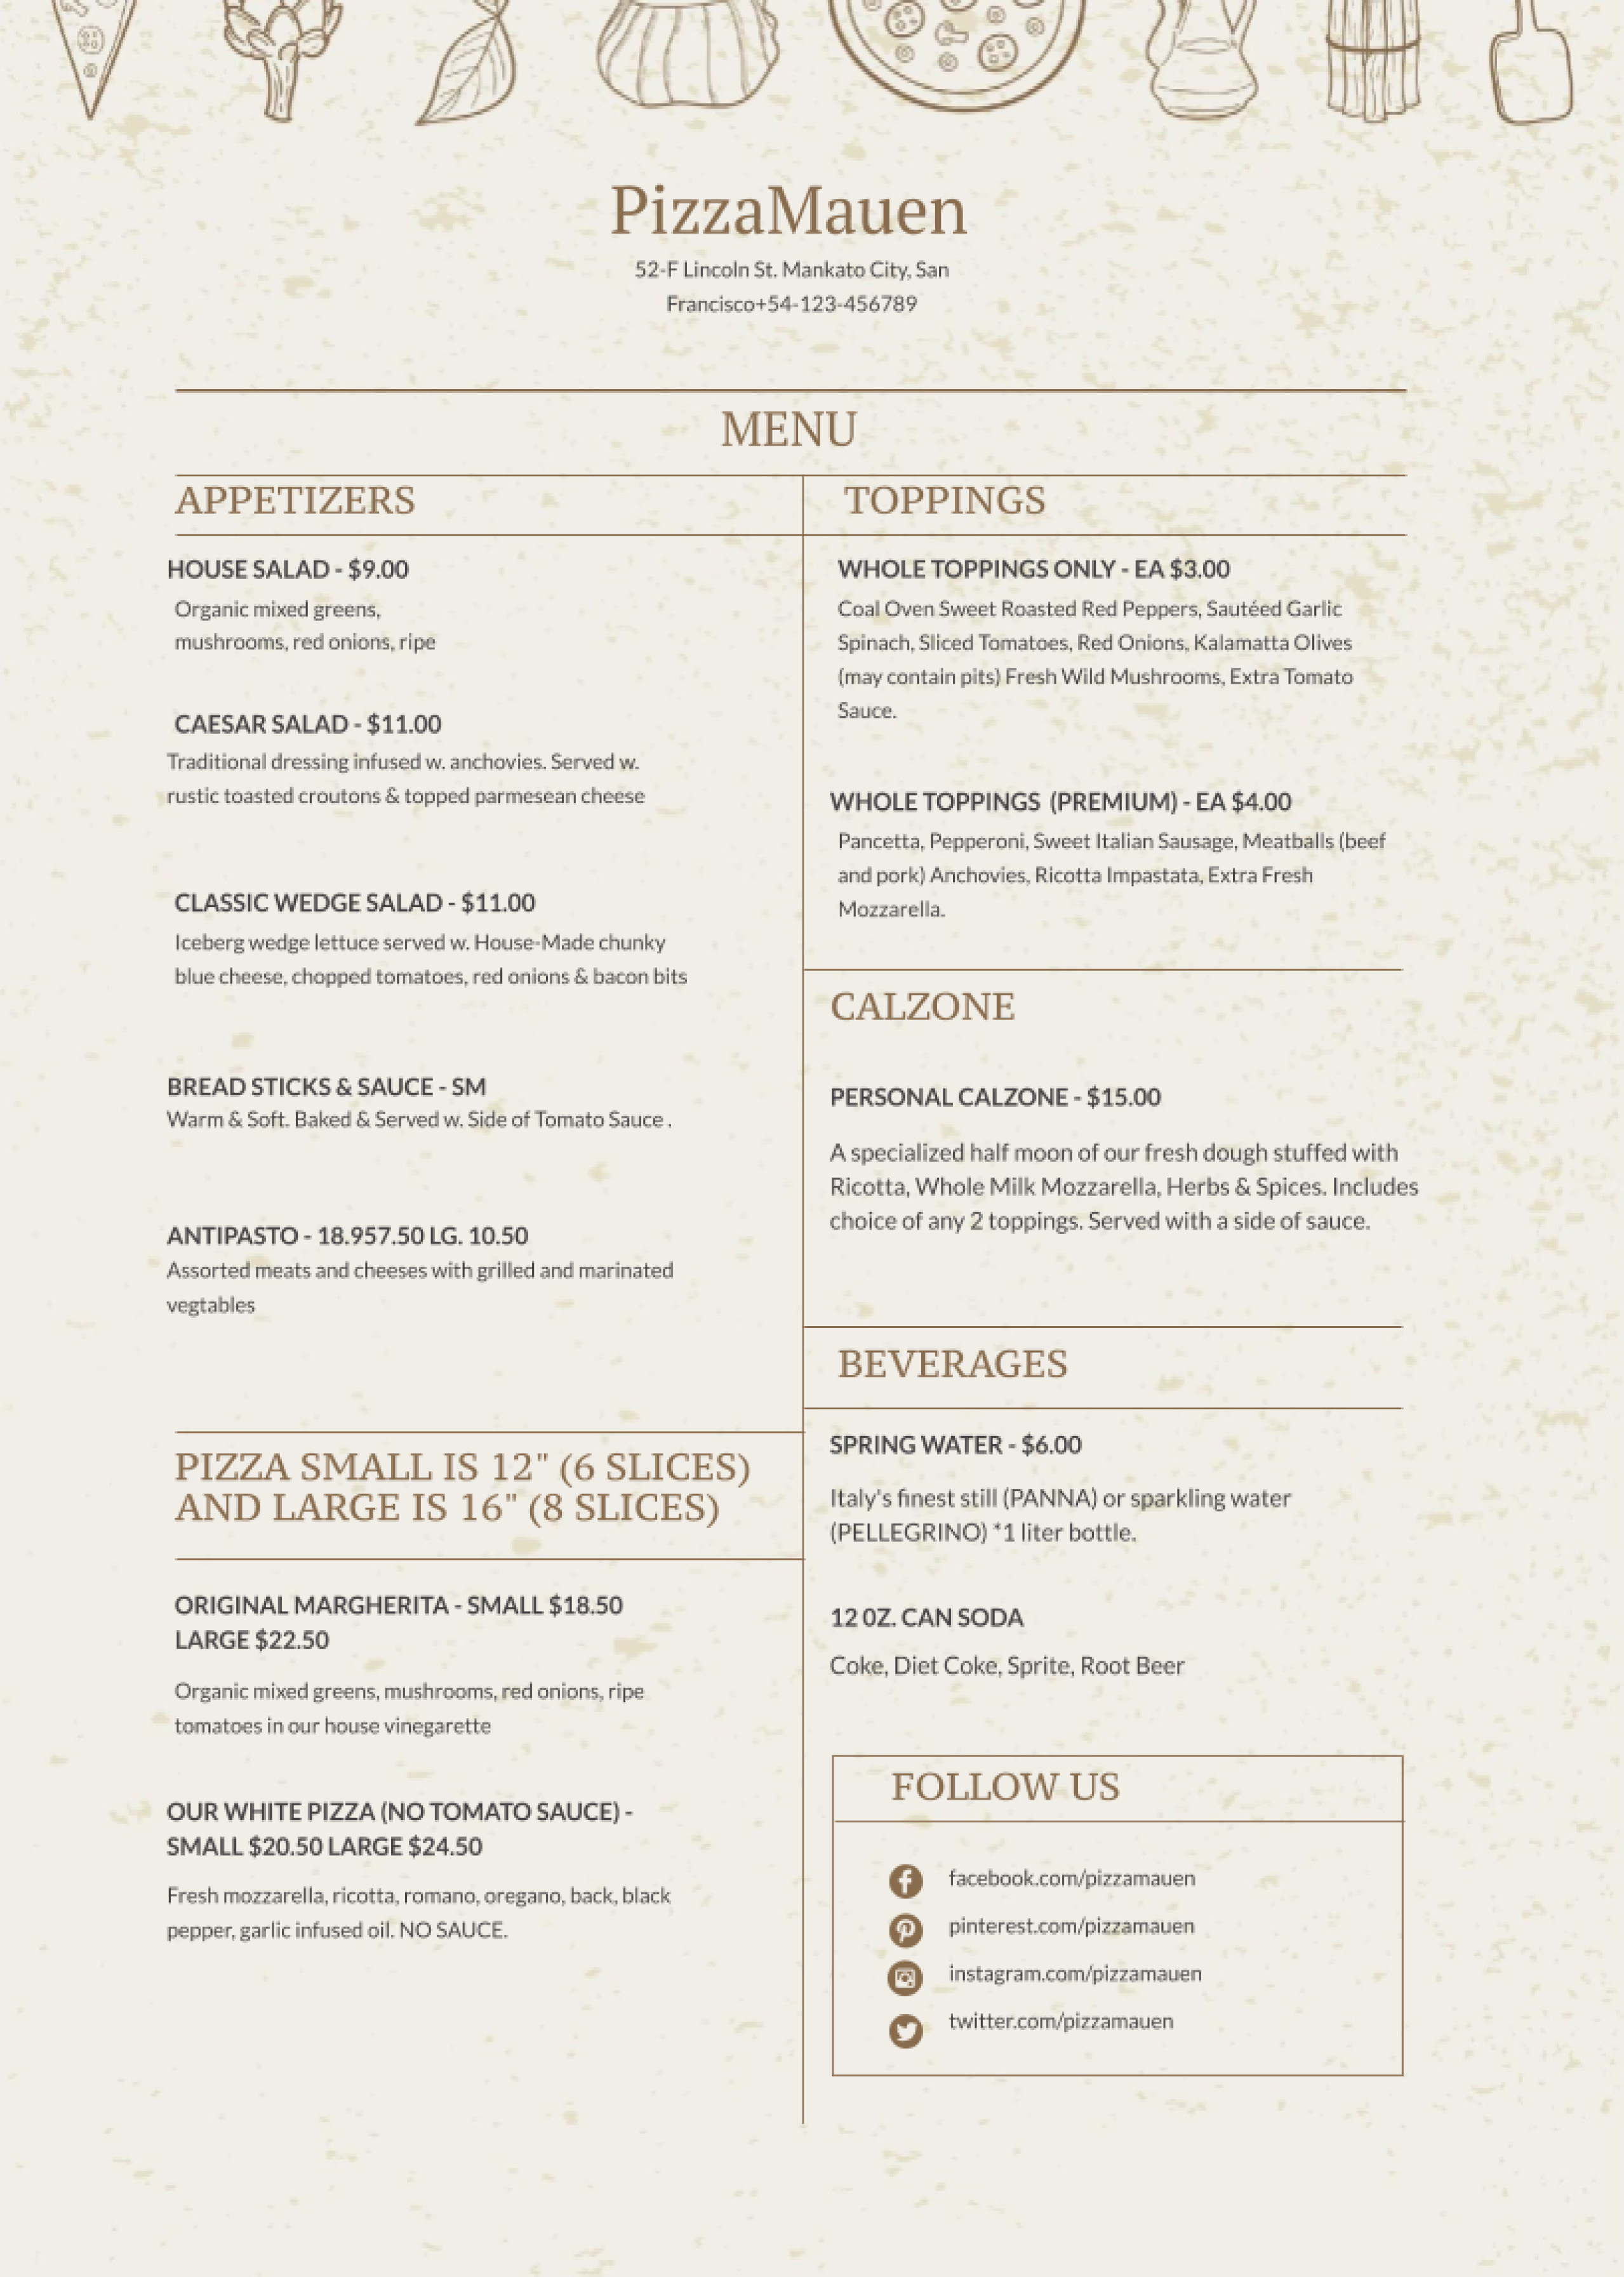 32-free-simple-menu-templates-for-restaurants-cafes-and-parties